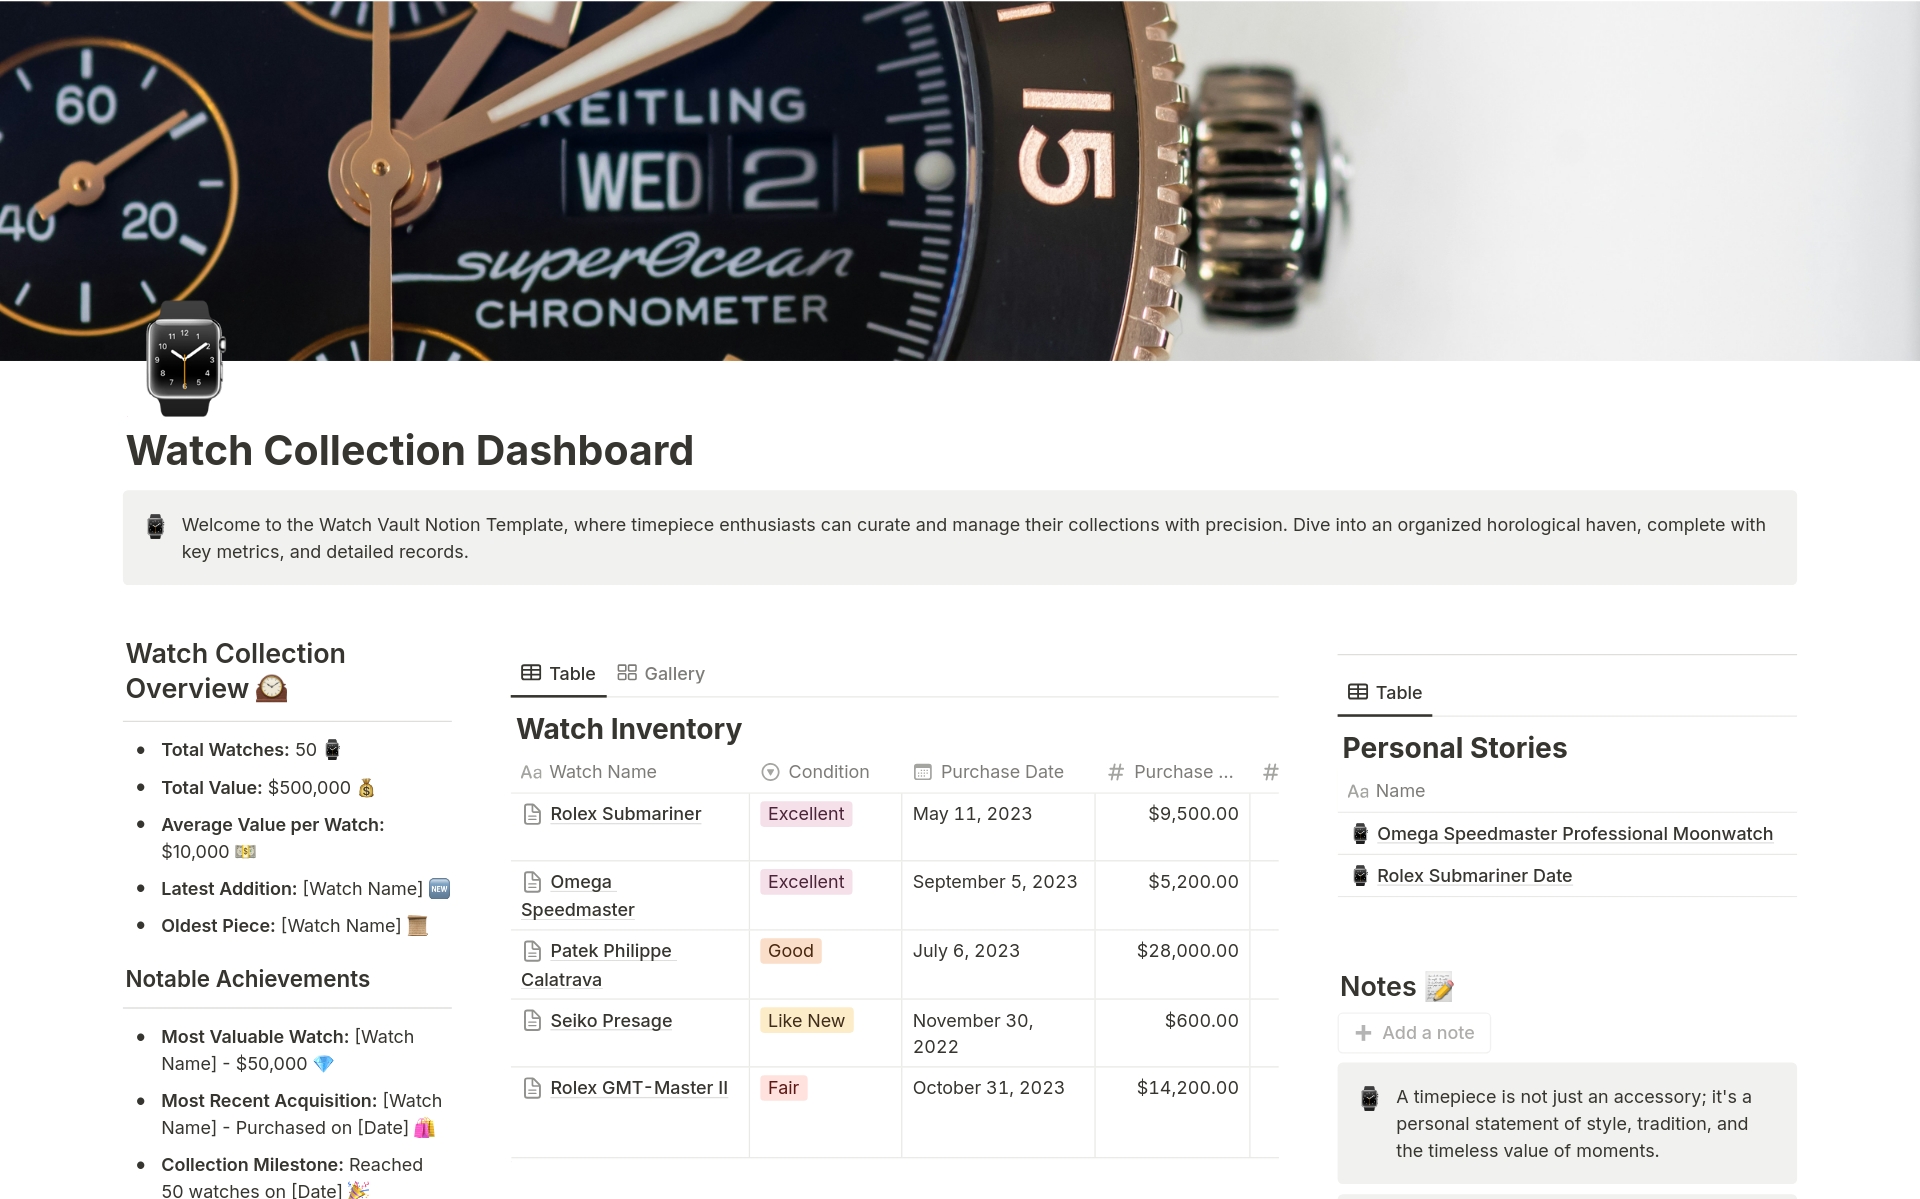 Elevate your watch collection 🕰️ Featuring an overview, detailed inventory database, personal stories section, and more. Perfect for tracking value, condition, and memories. Customizable, easy to use, and designed for enthusiasts.